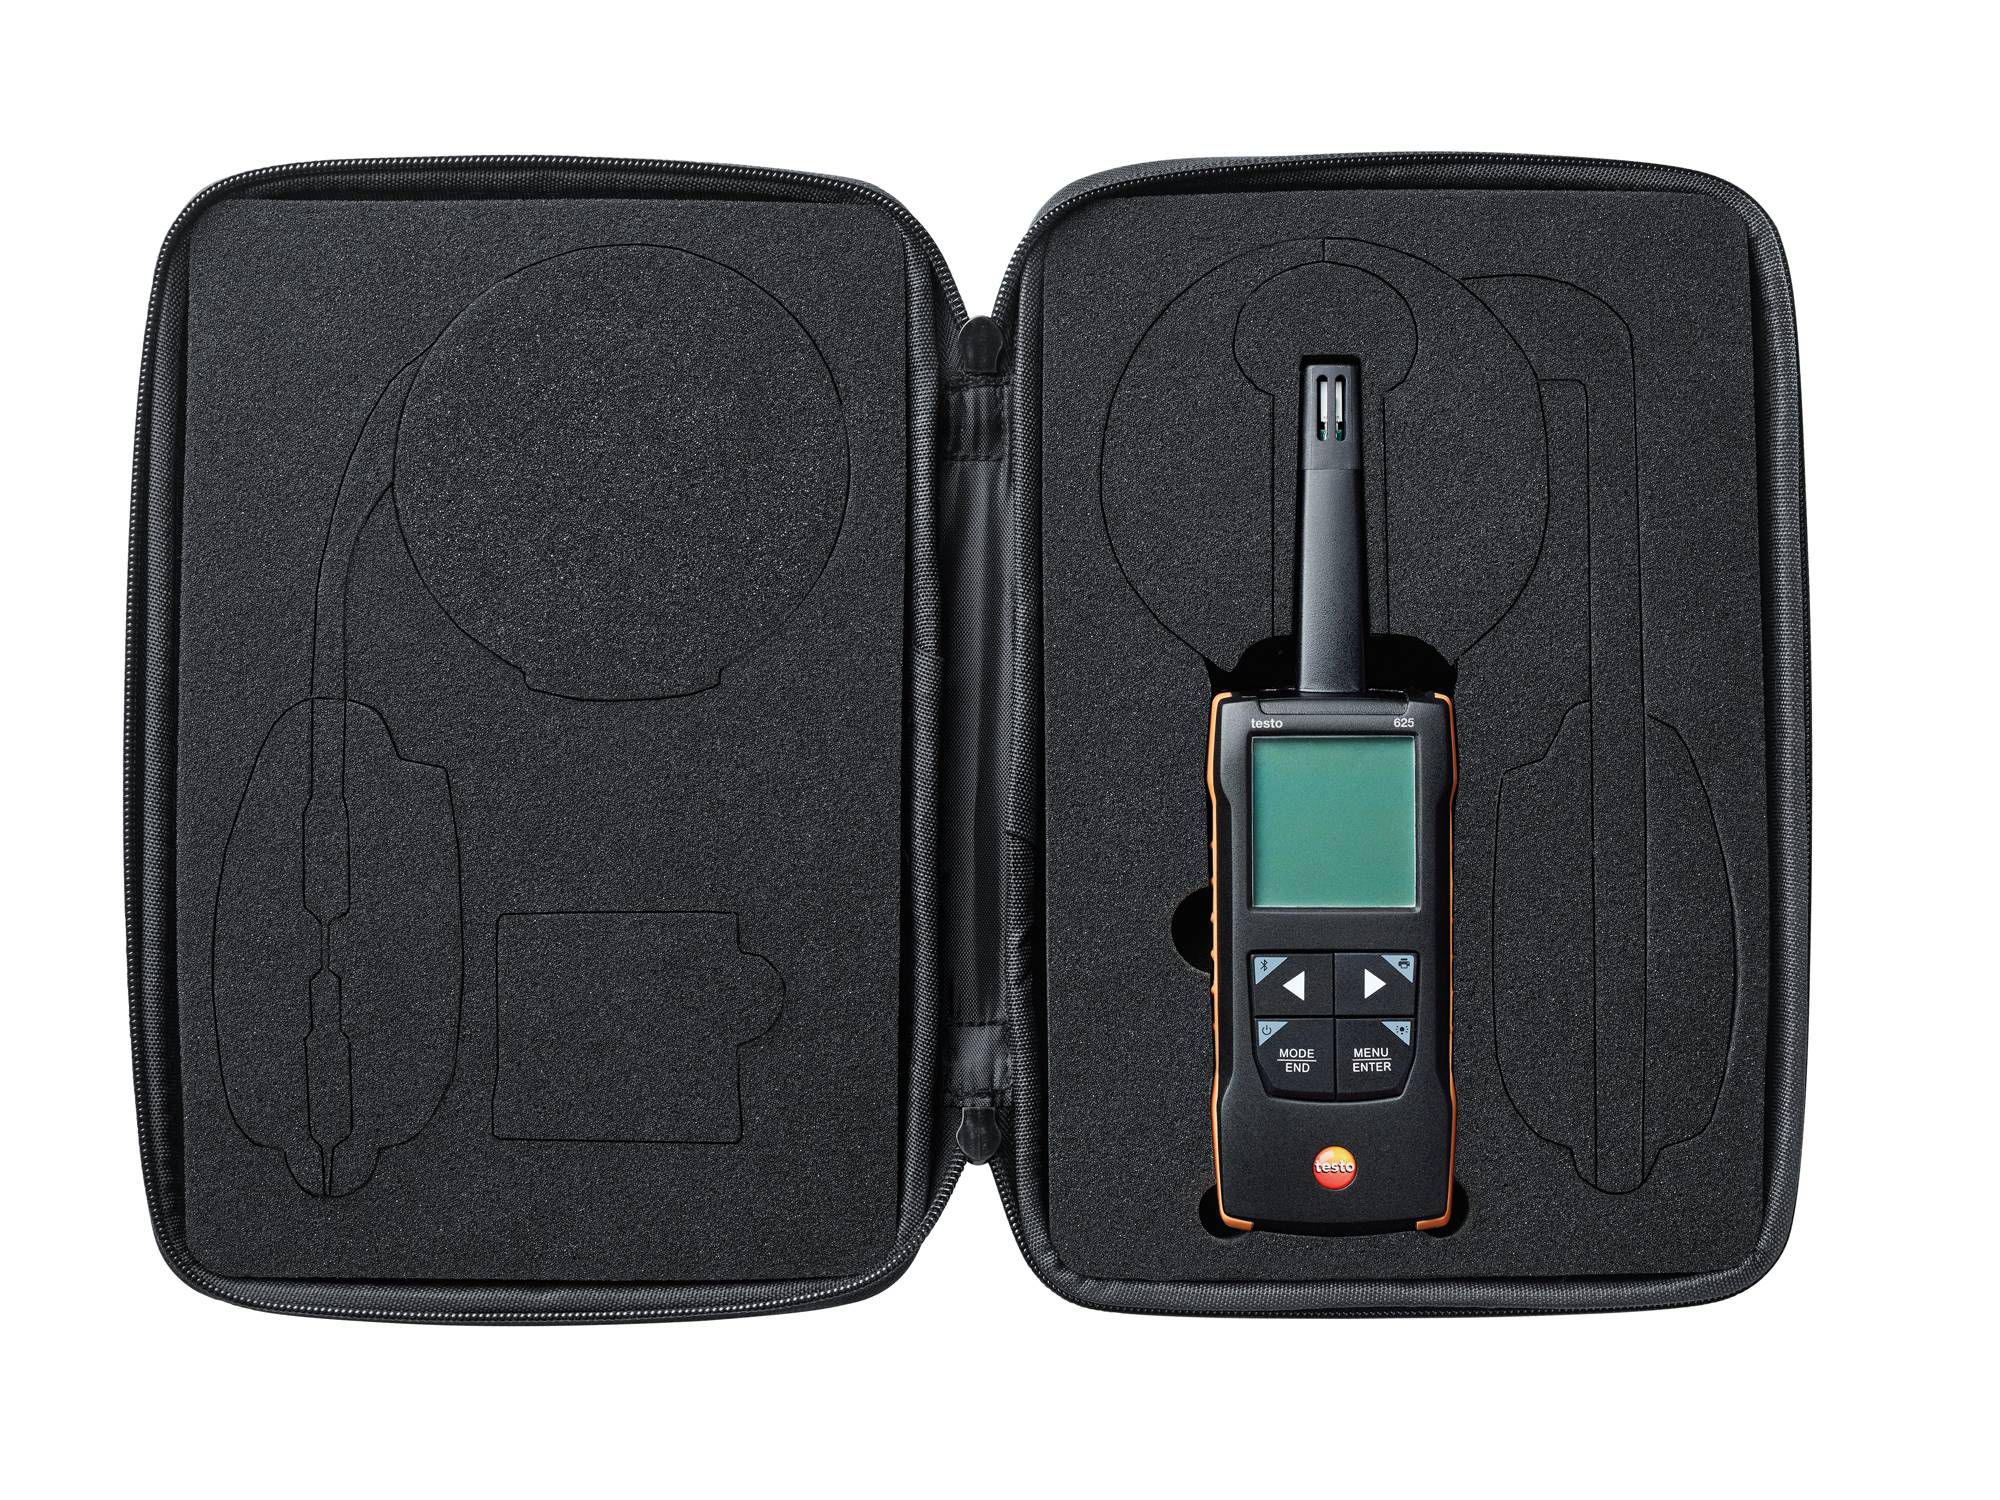 Testo 625 – Digital Thermohygrometer with App connection